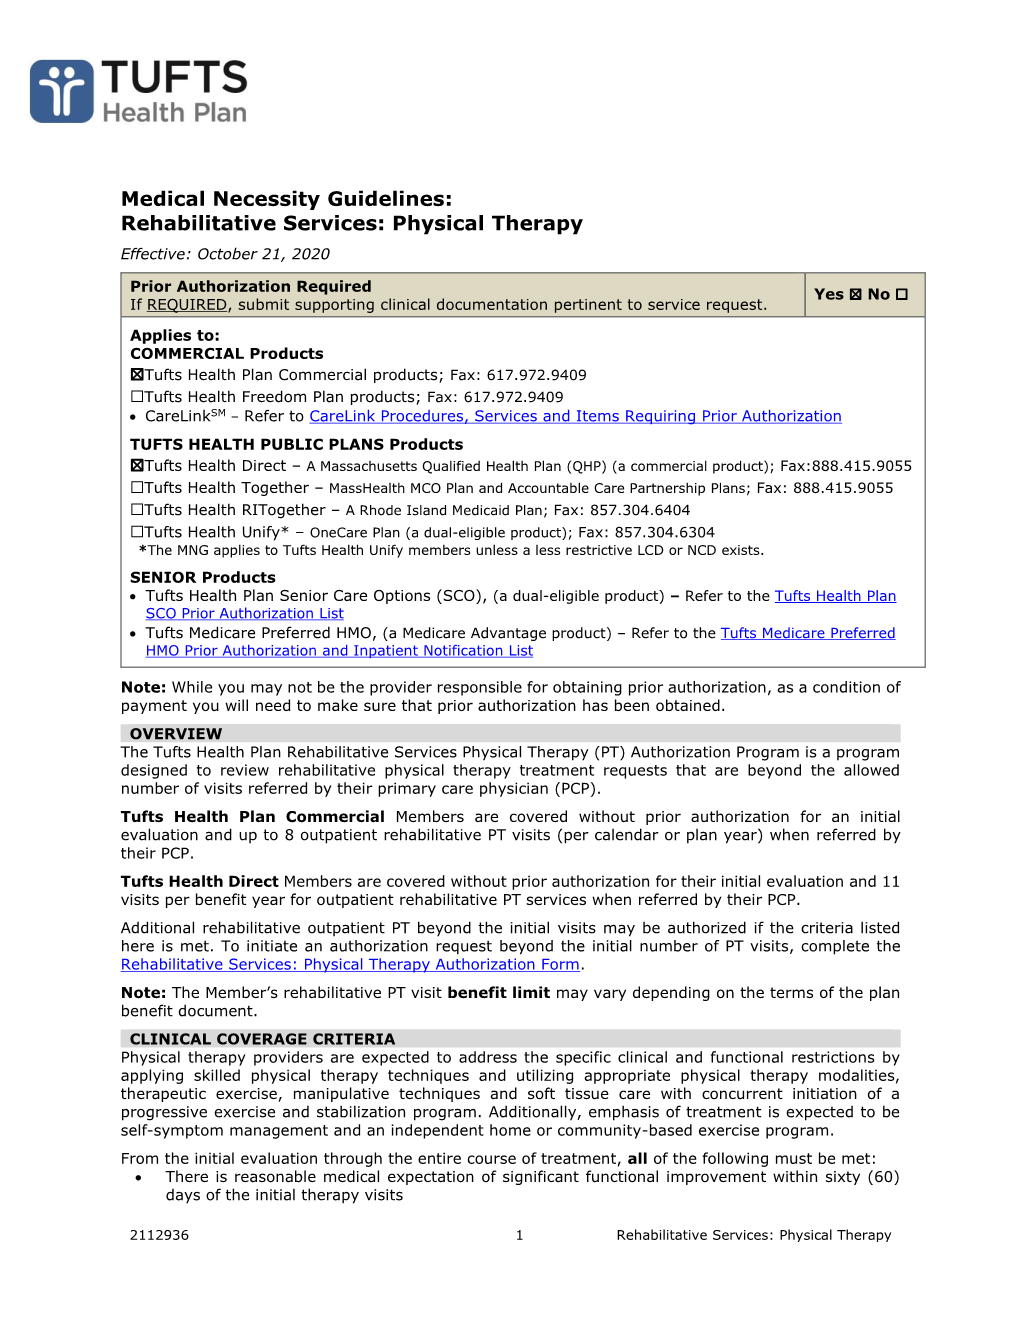 Medical Necessity Guidelines: Rehabilitative Services: Physical Therapy Effective: October 21, 2020